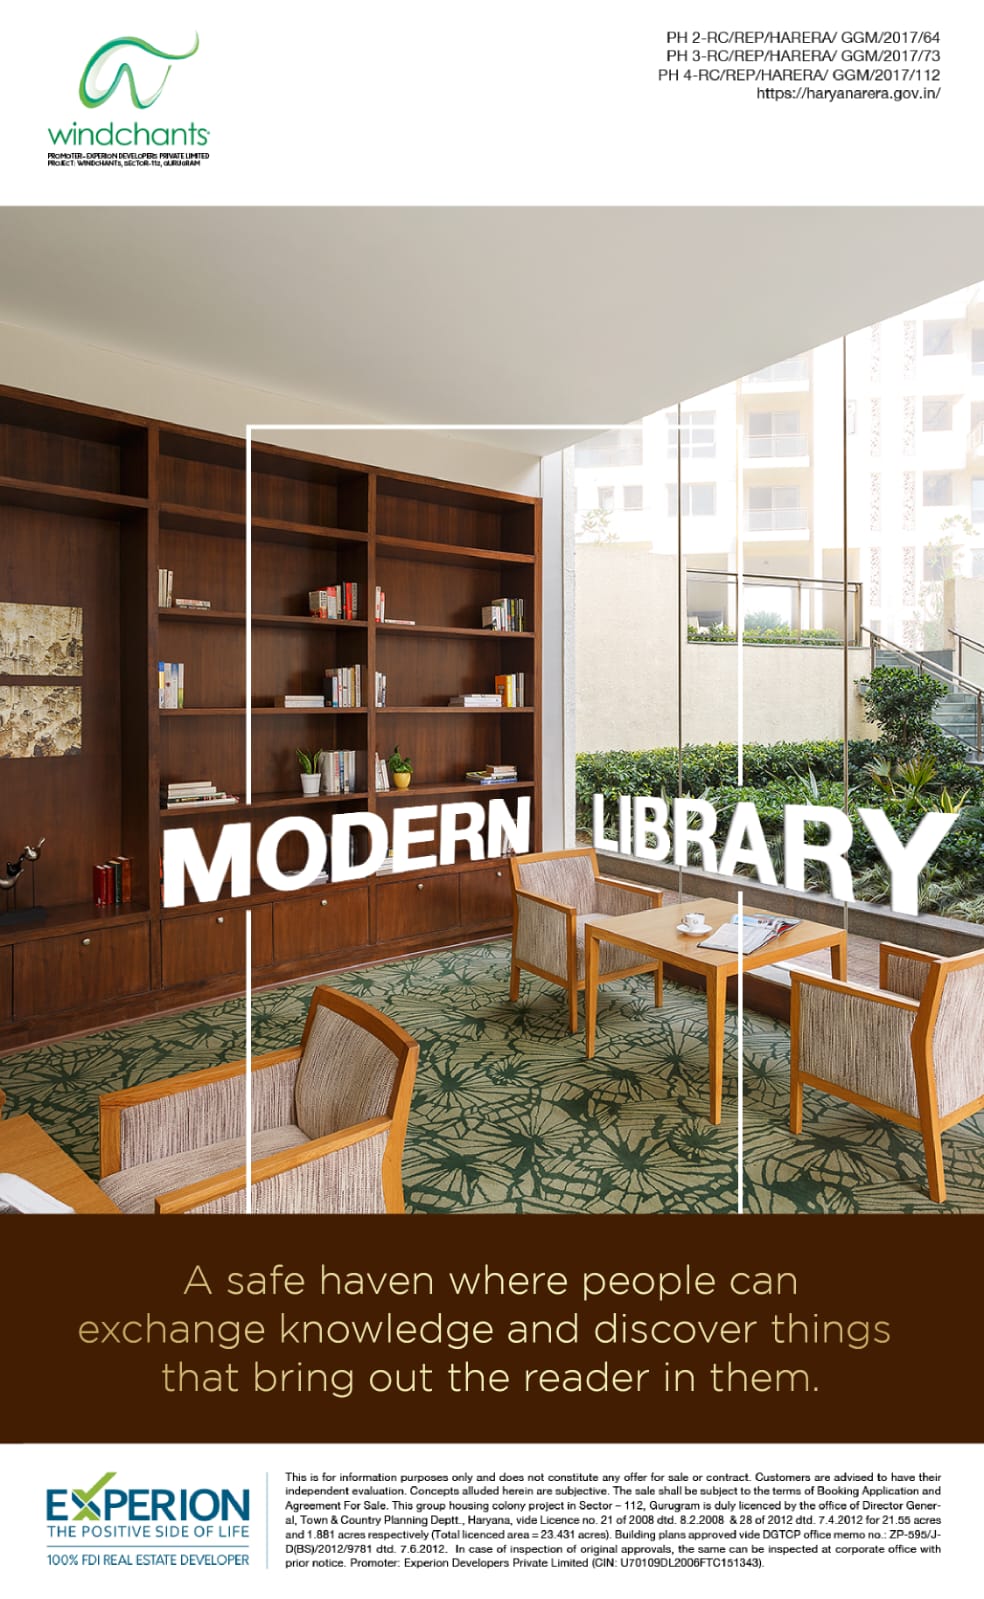 Experion Windchants presenting modern library in Sector 11, Gurgaon Update